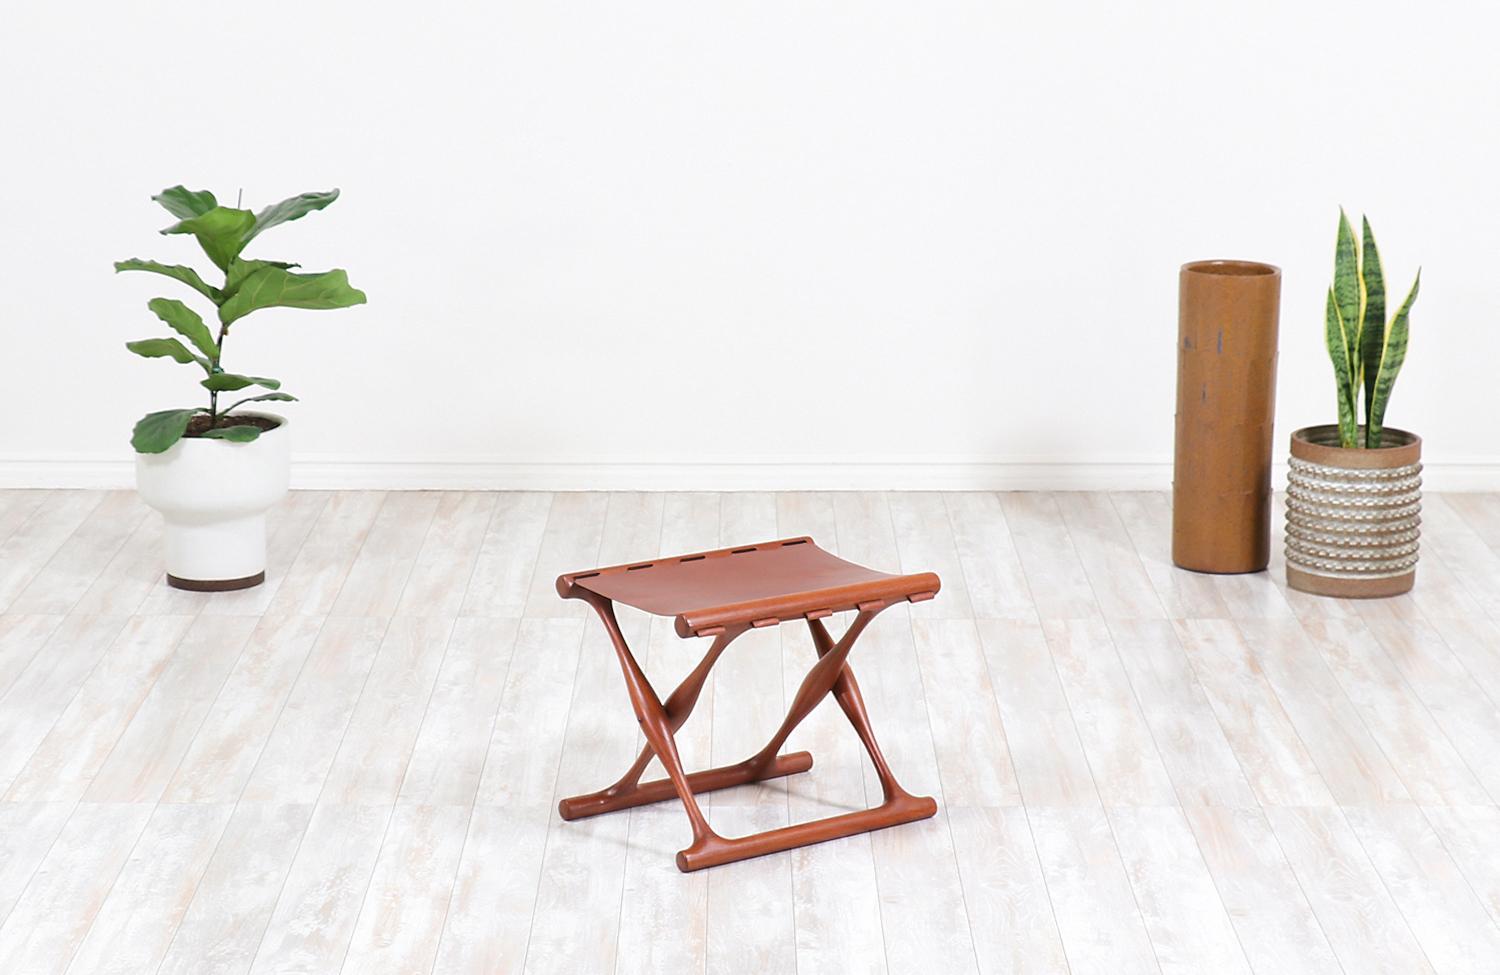 Iconic “Gold Hill” folding stool designed by Poul Hundevad for Vamdrup Stolefabrik in Denmark, circa 1950s. This beautiful Danish modern stool is known to be inspired in a design dated back from the Scandinavian Bronze Age, in which an example is